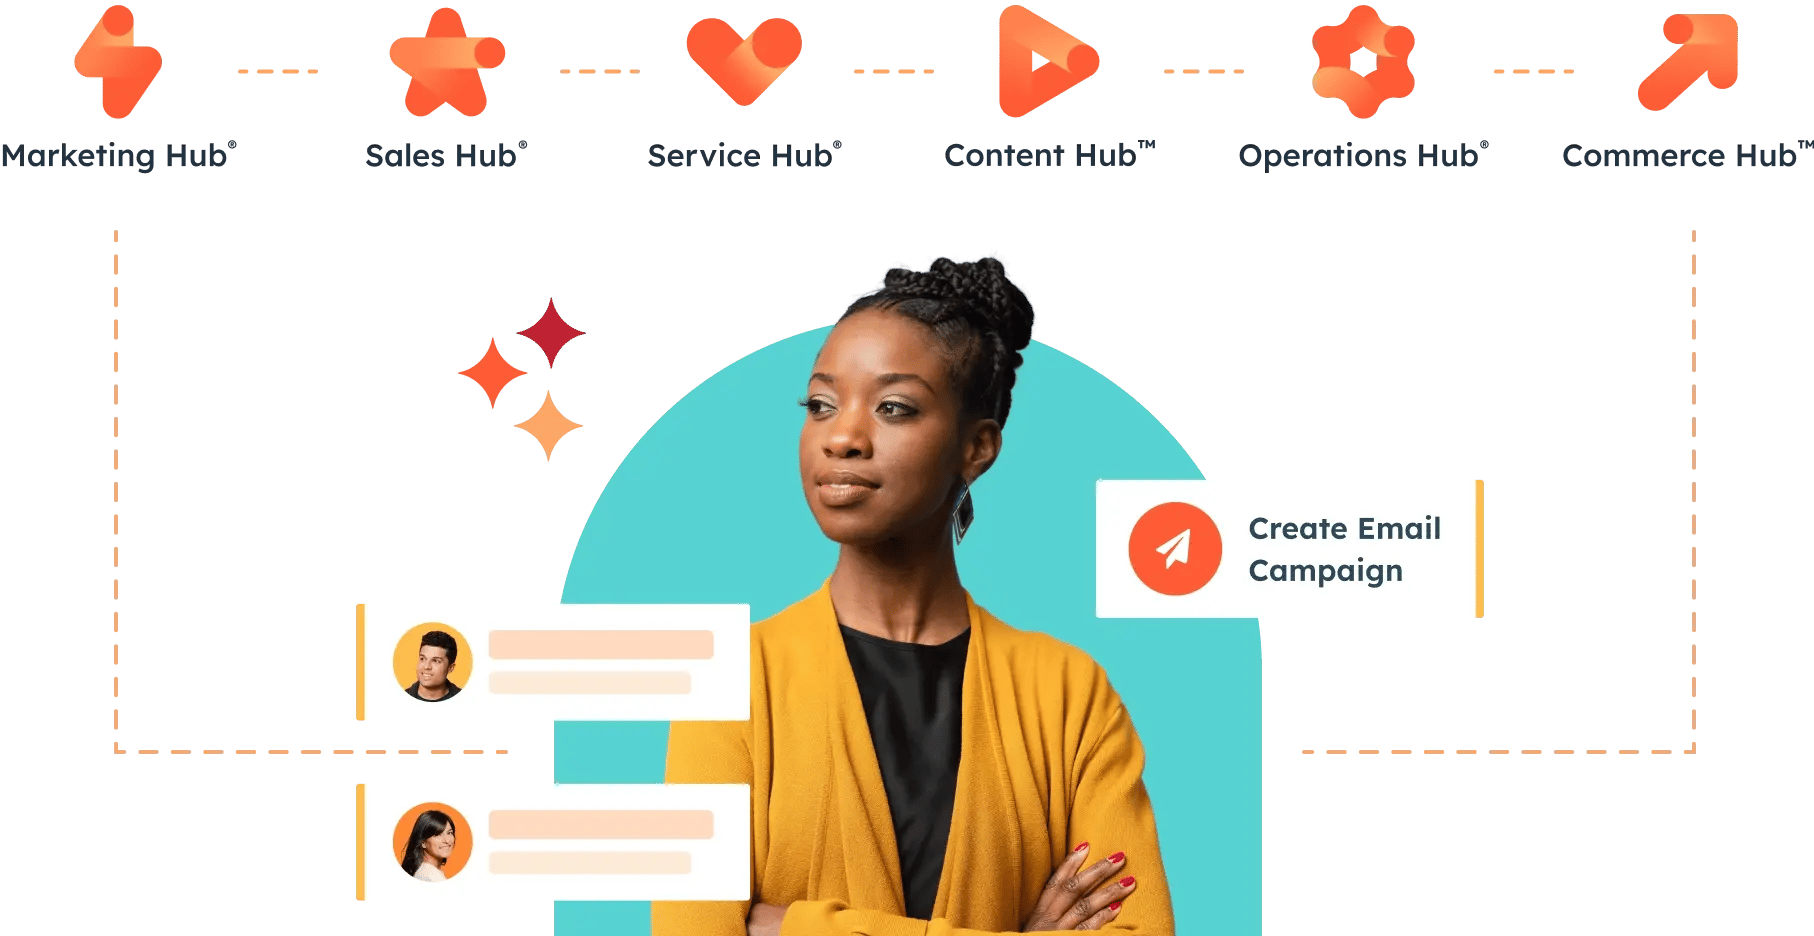 HubSpot's products, which include Marketing Hub, Sales Hub, Service Hub, Content Hub, Operations Hub, and Commerce Hub, are connected on the same software platform.